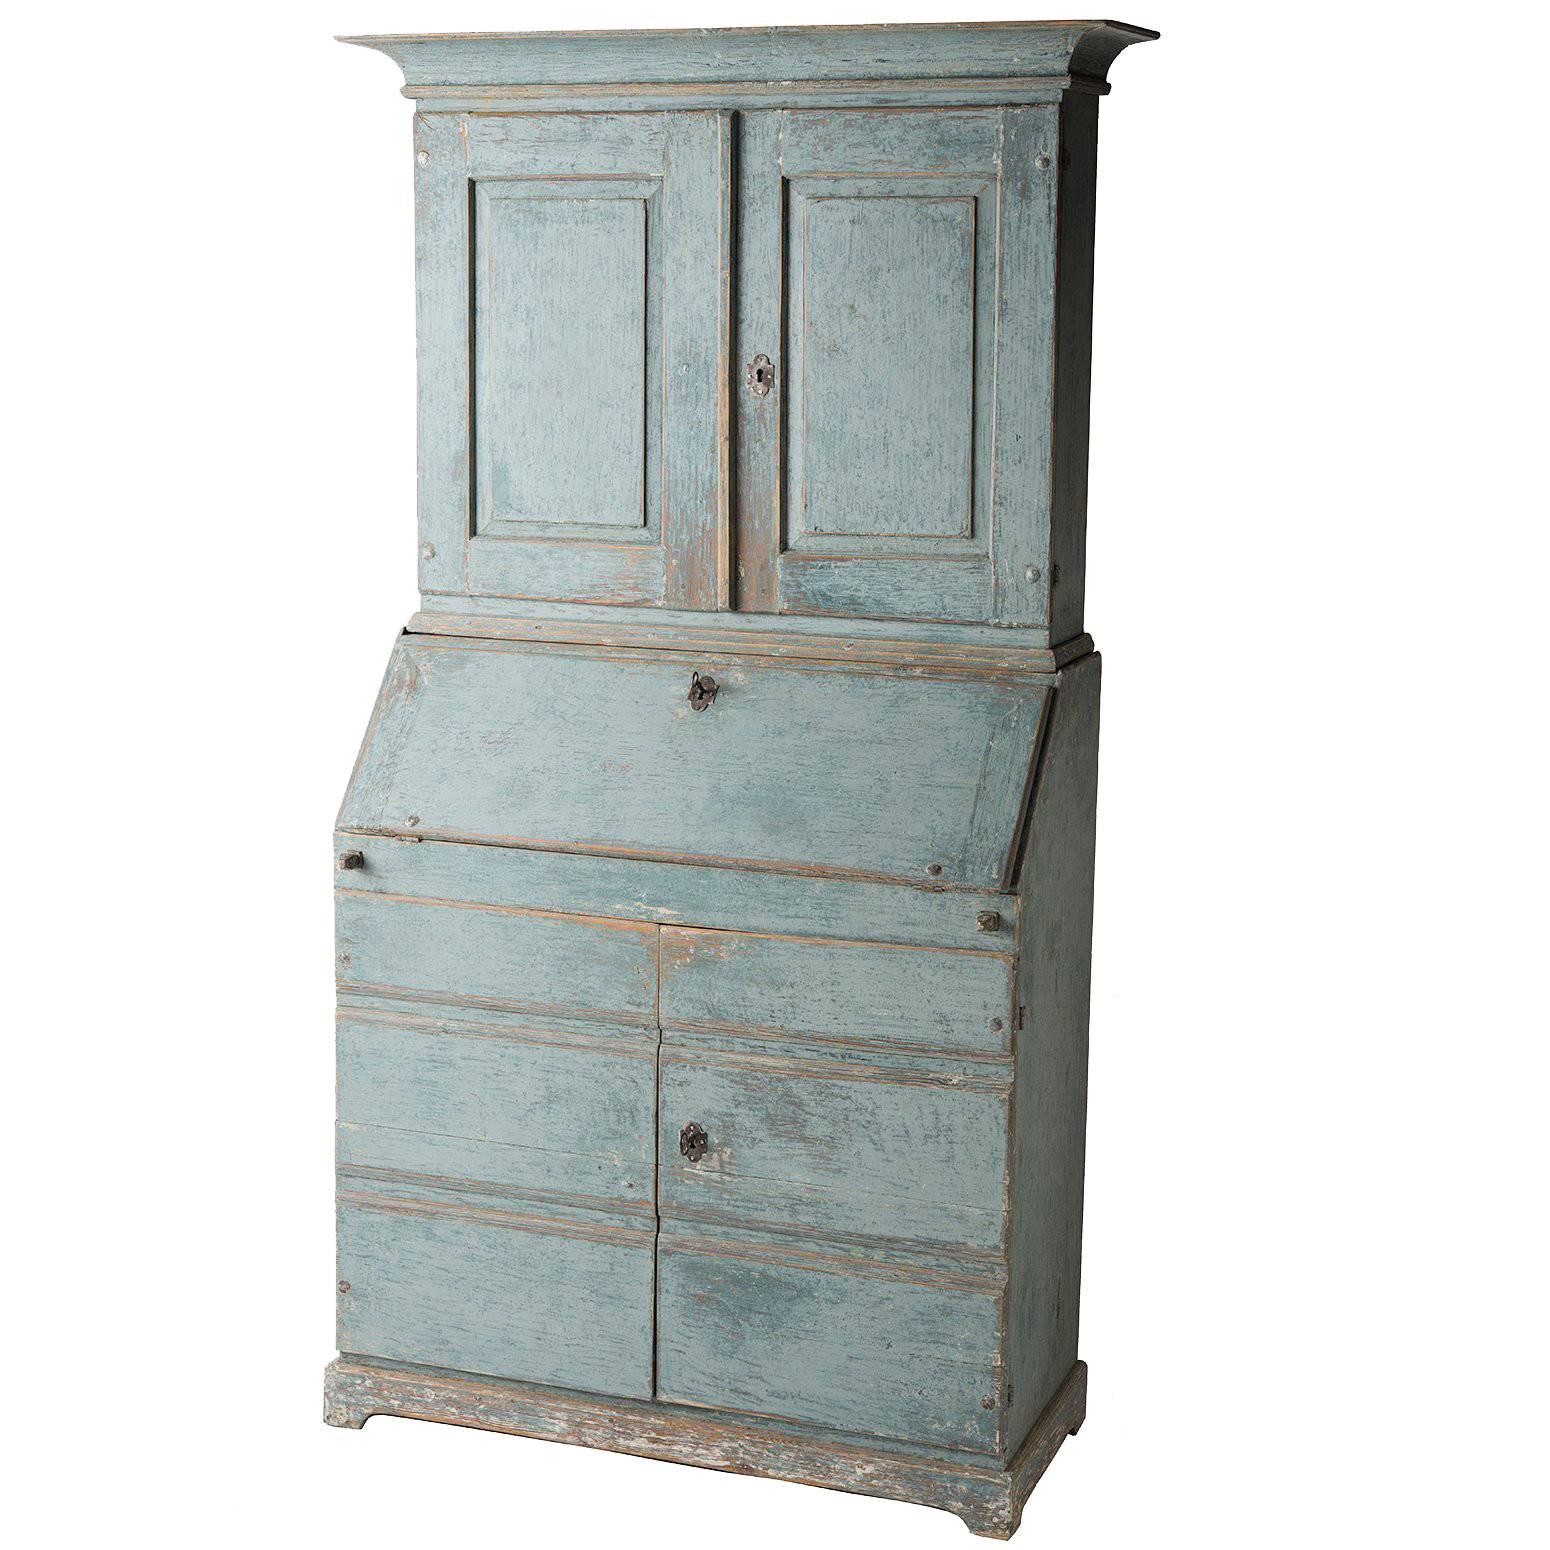 A wonderful Swedish blue, this stately secretary has a number of great details that highlight the work of a talented calligrapher. The interior drawers are beautifully numbered from one to six, a great way to stay organized in style! The inside of